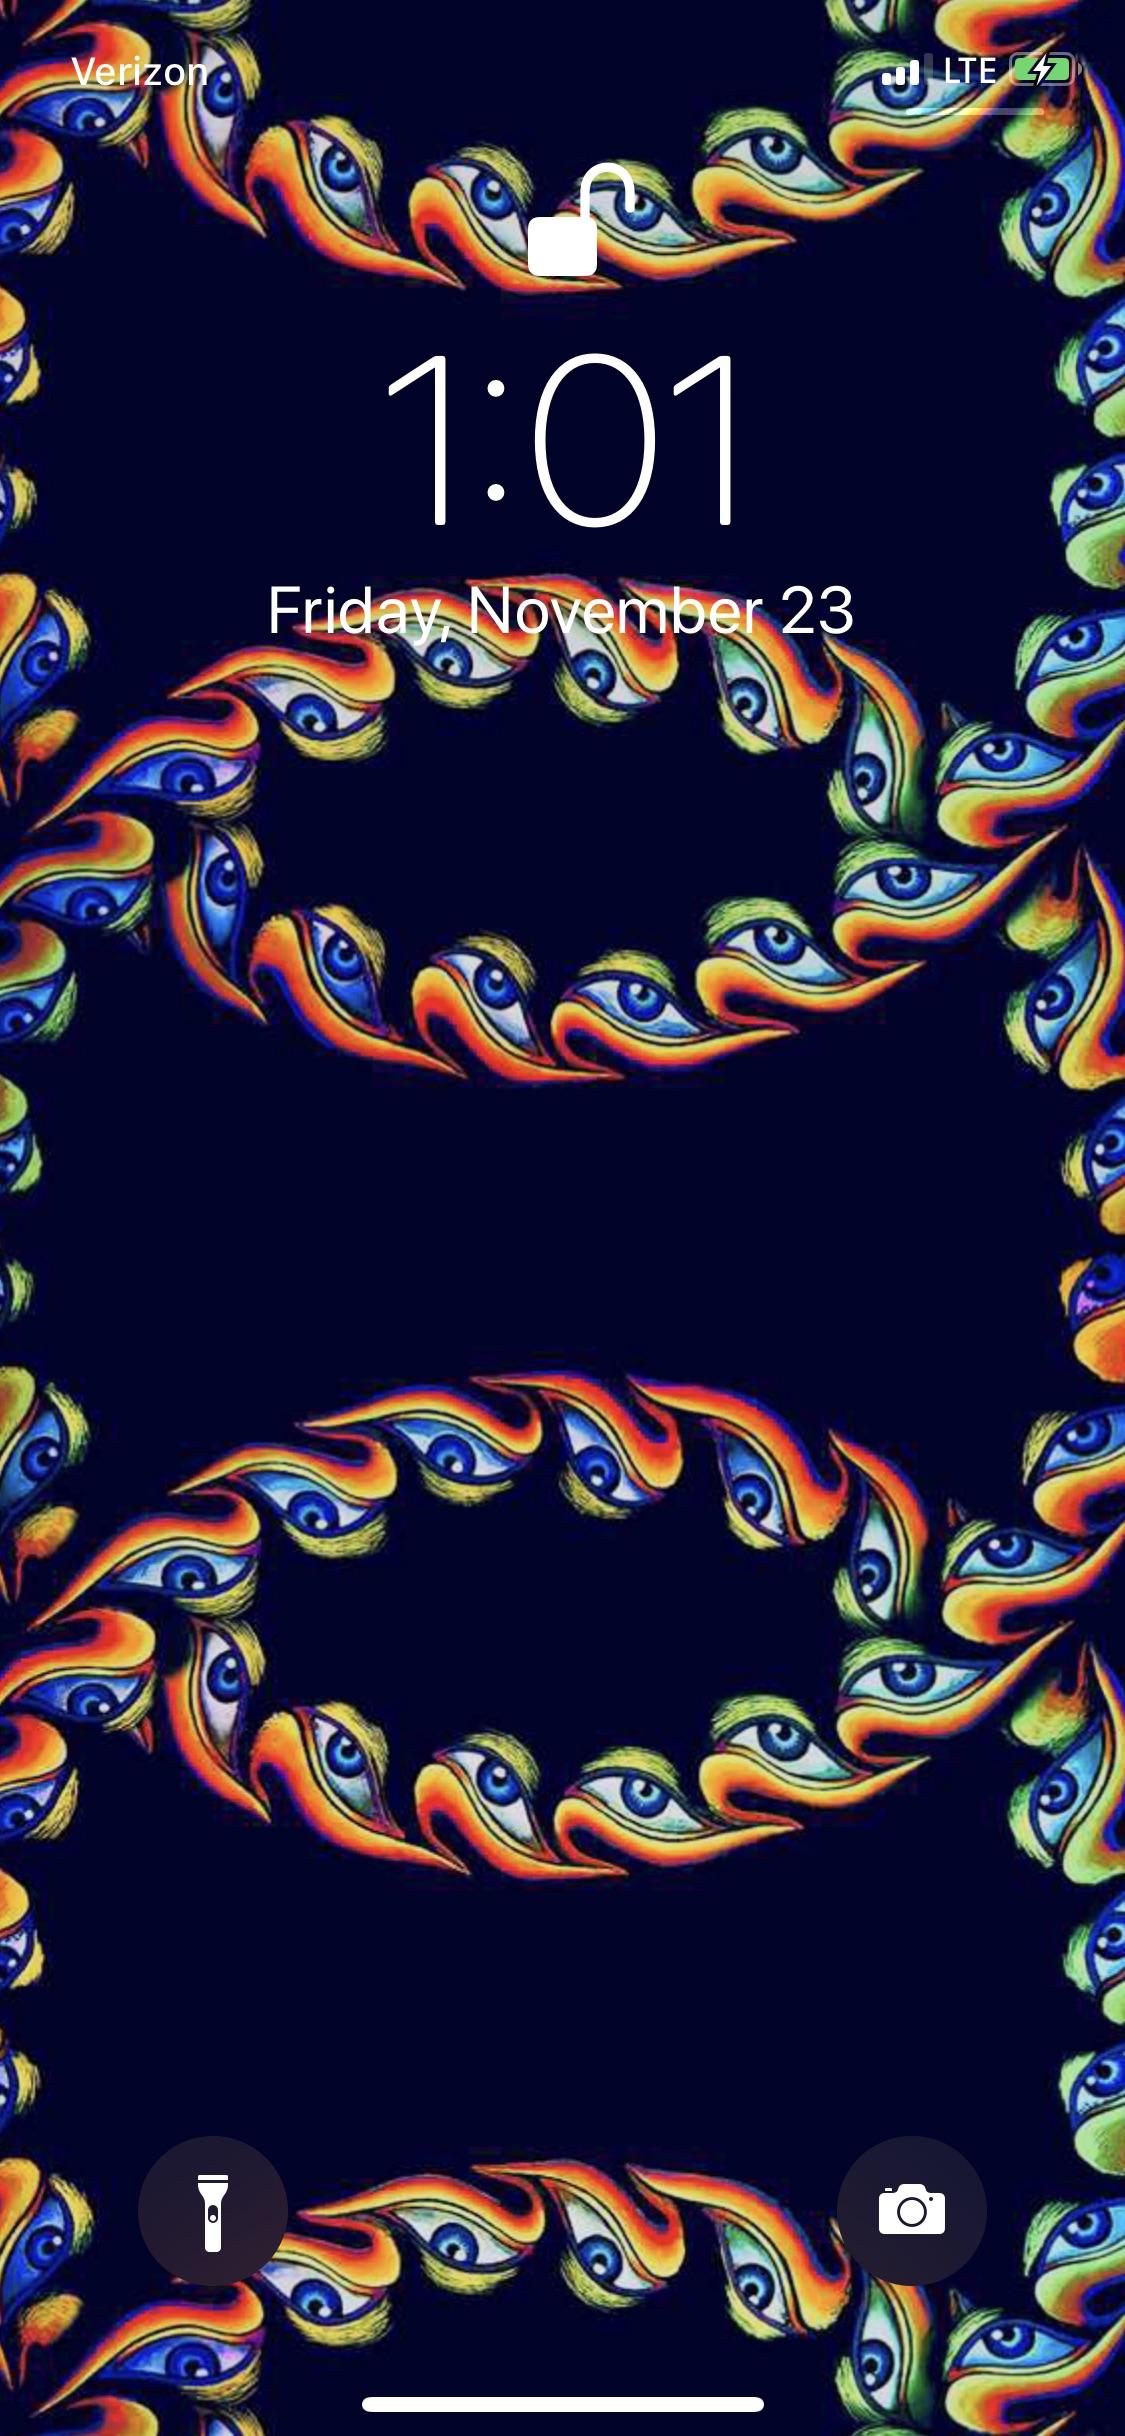 Check Out This Lateralus Wallpaper I Found While